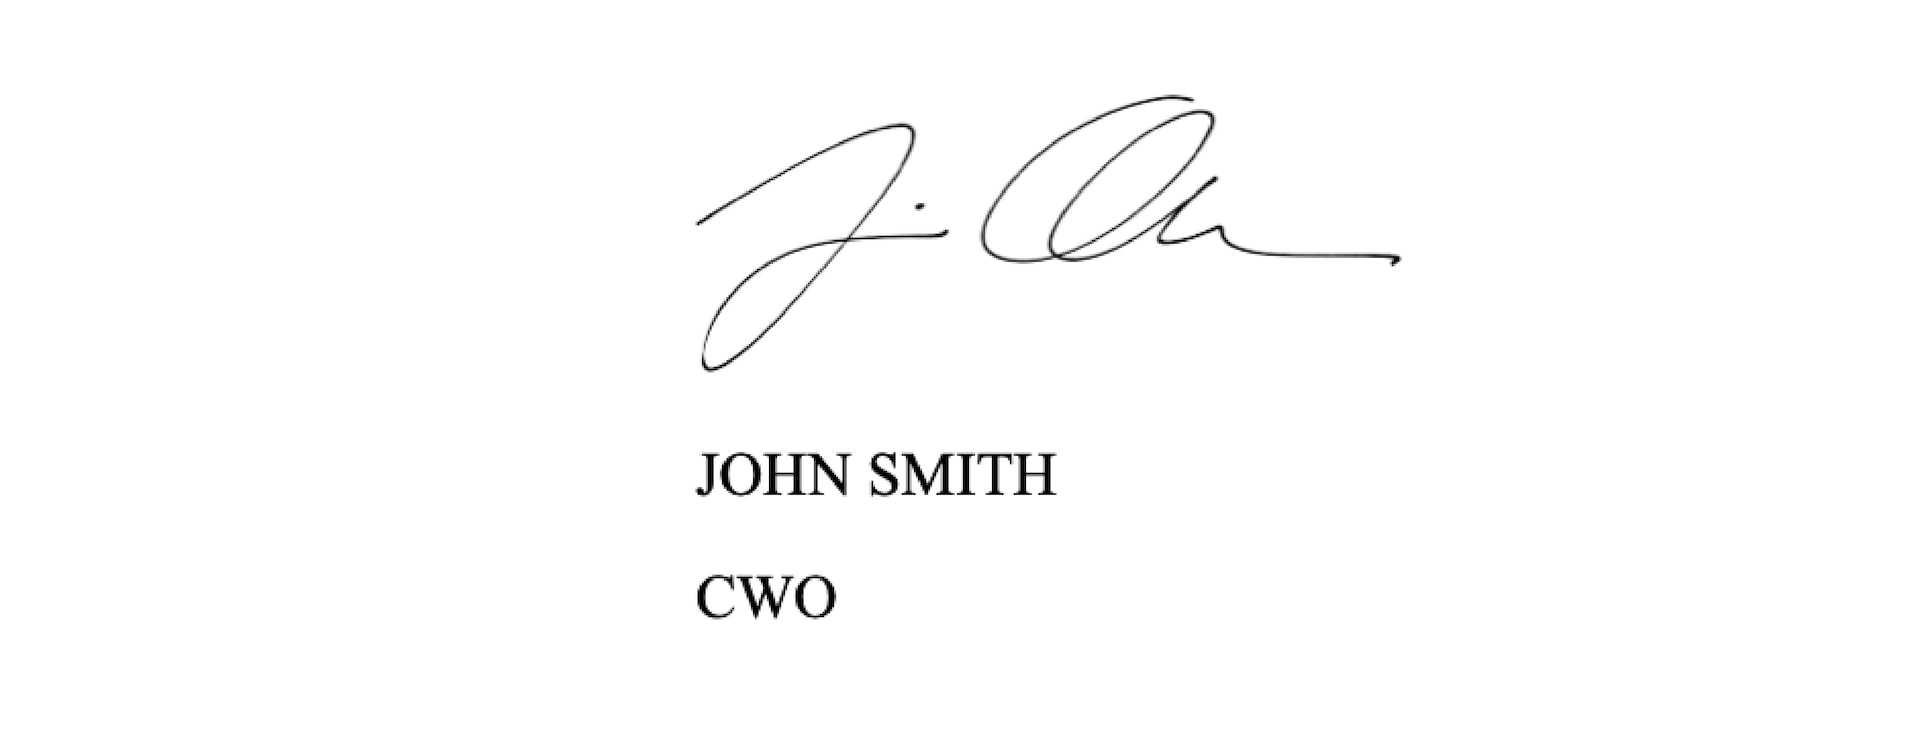 The signature section a sample AAR.  John Smith, CWO.